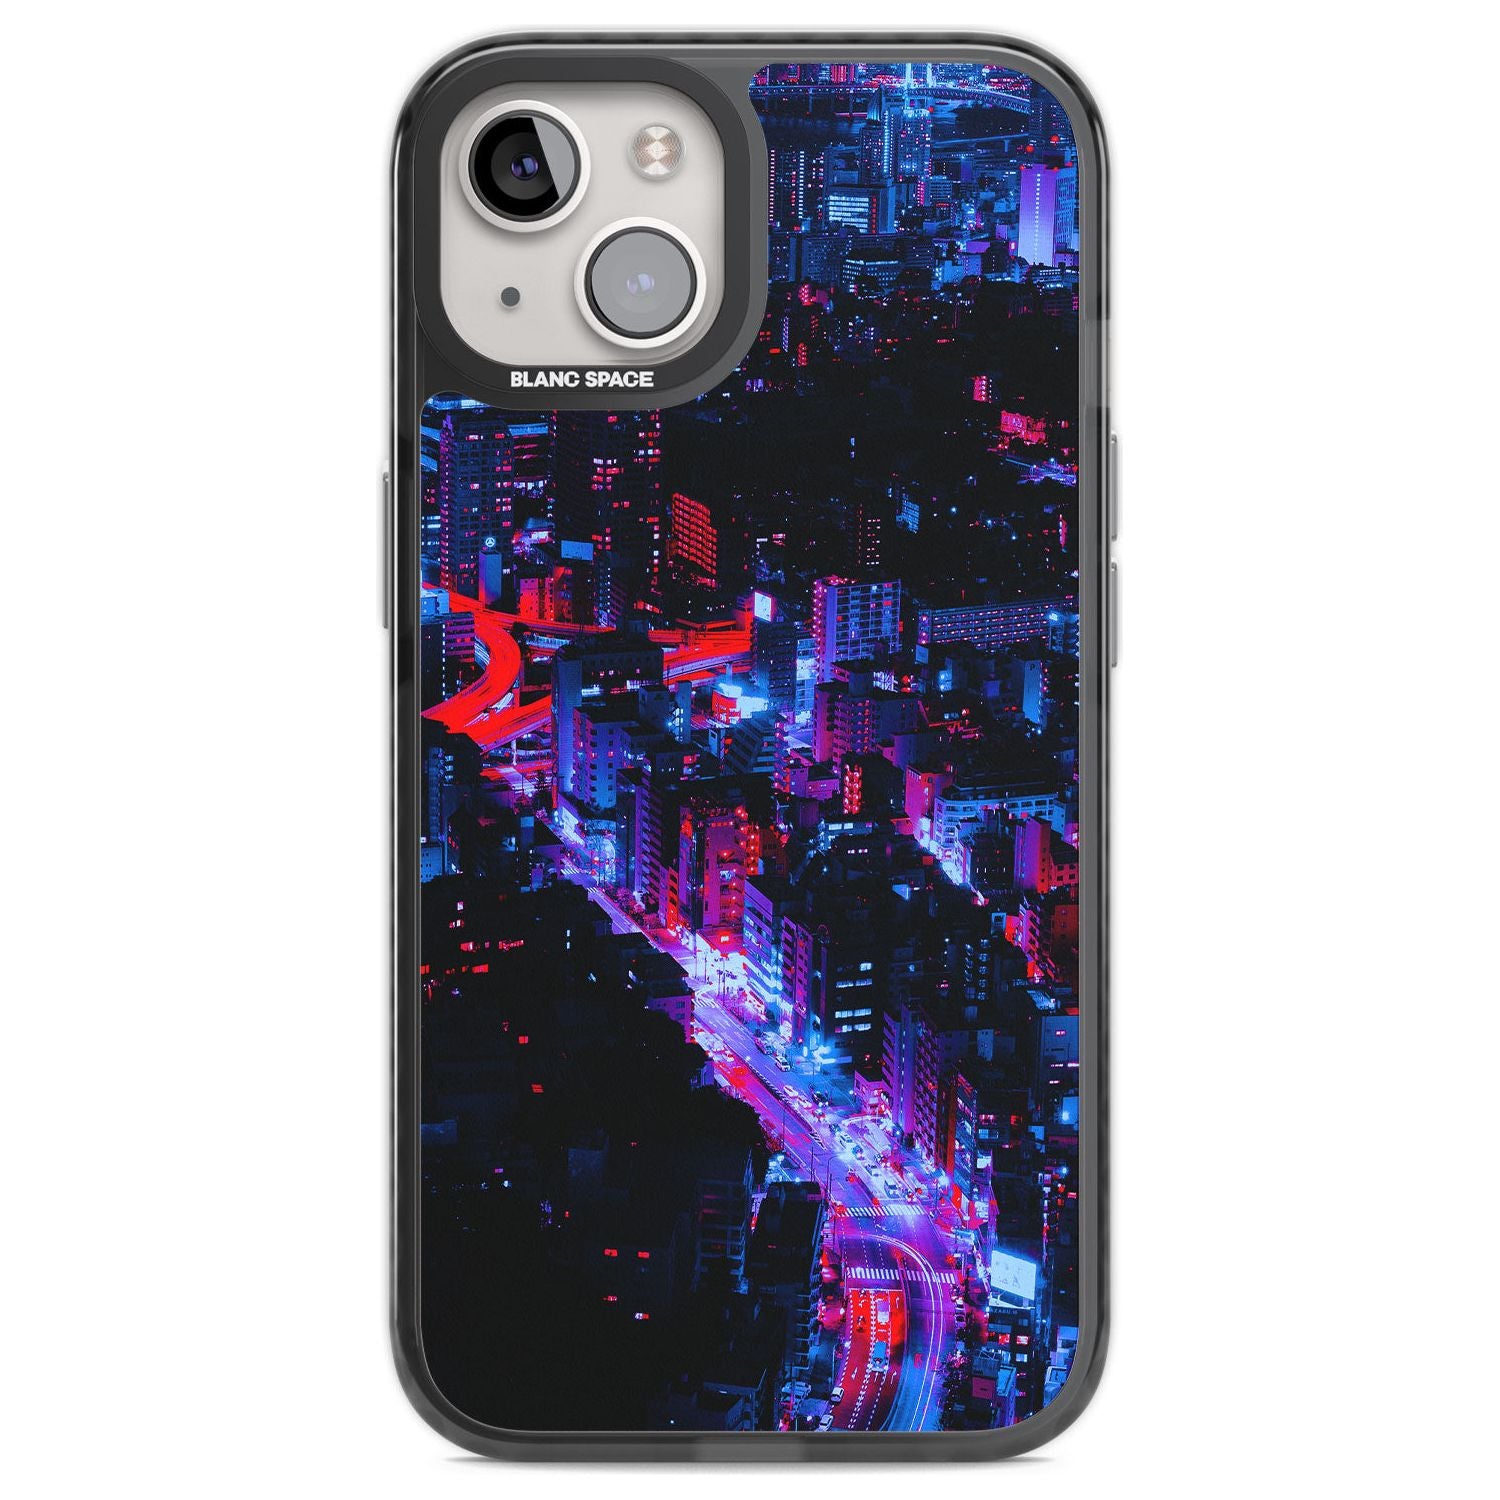 Arial City View - Neon Cities Photographs Phone Case iPhone 12 / Black Impact Case,iPhone 13 / Black Impact Case,iPhone 12 Pro / Black Impact Case,iPhone 14 / Black Impact Case,iPhone 15 Plus / Black Impact Case,iPhone 15 / Black Impact Case Blanc Space